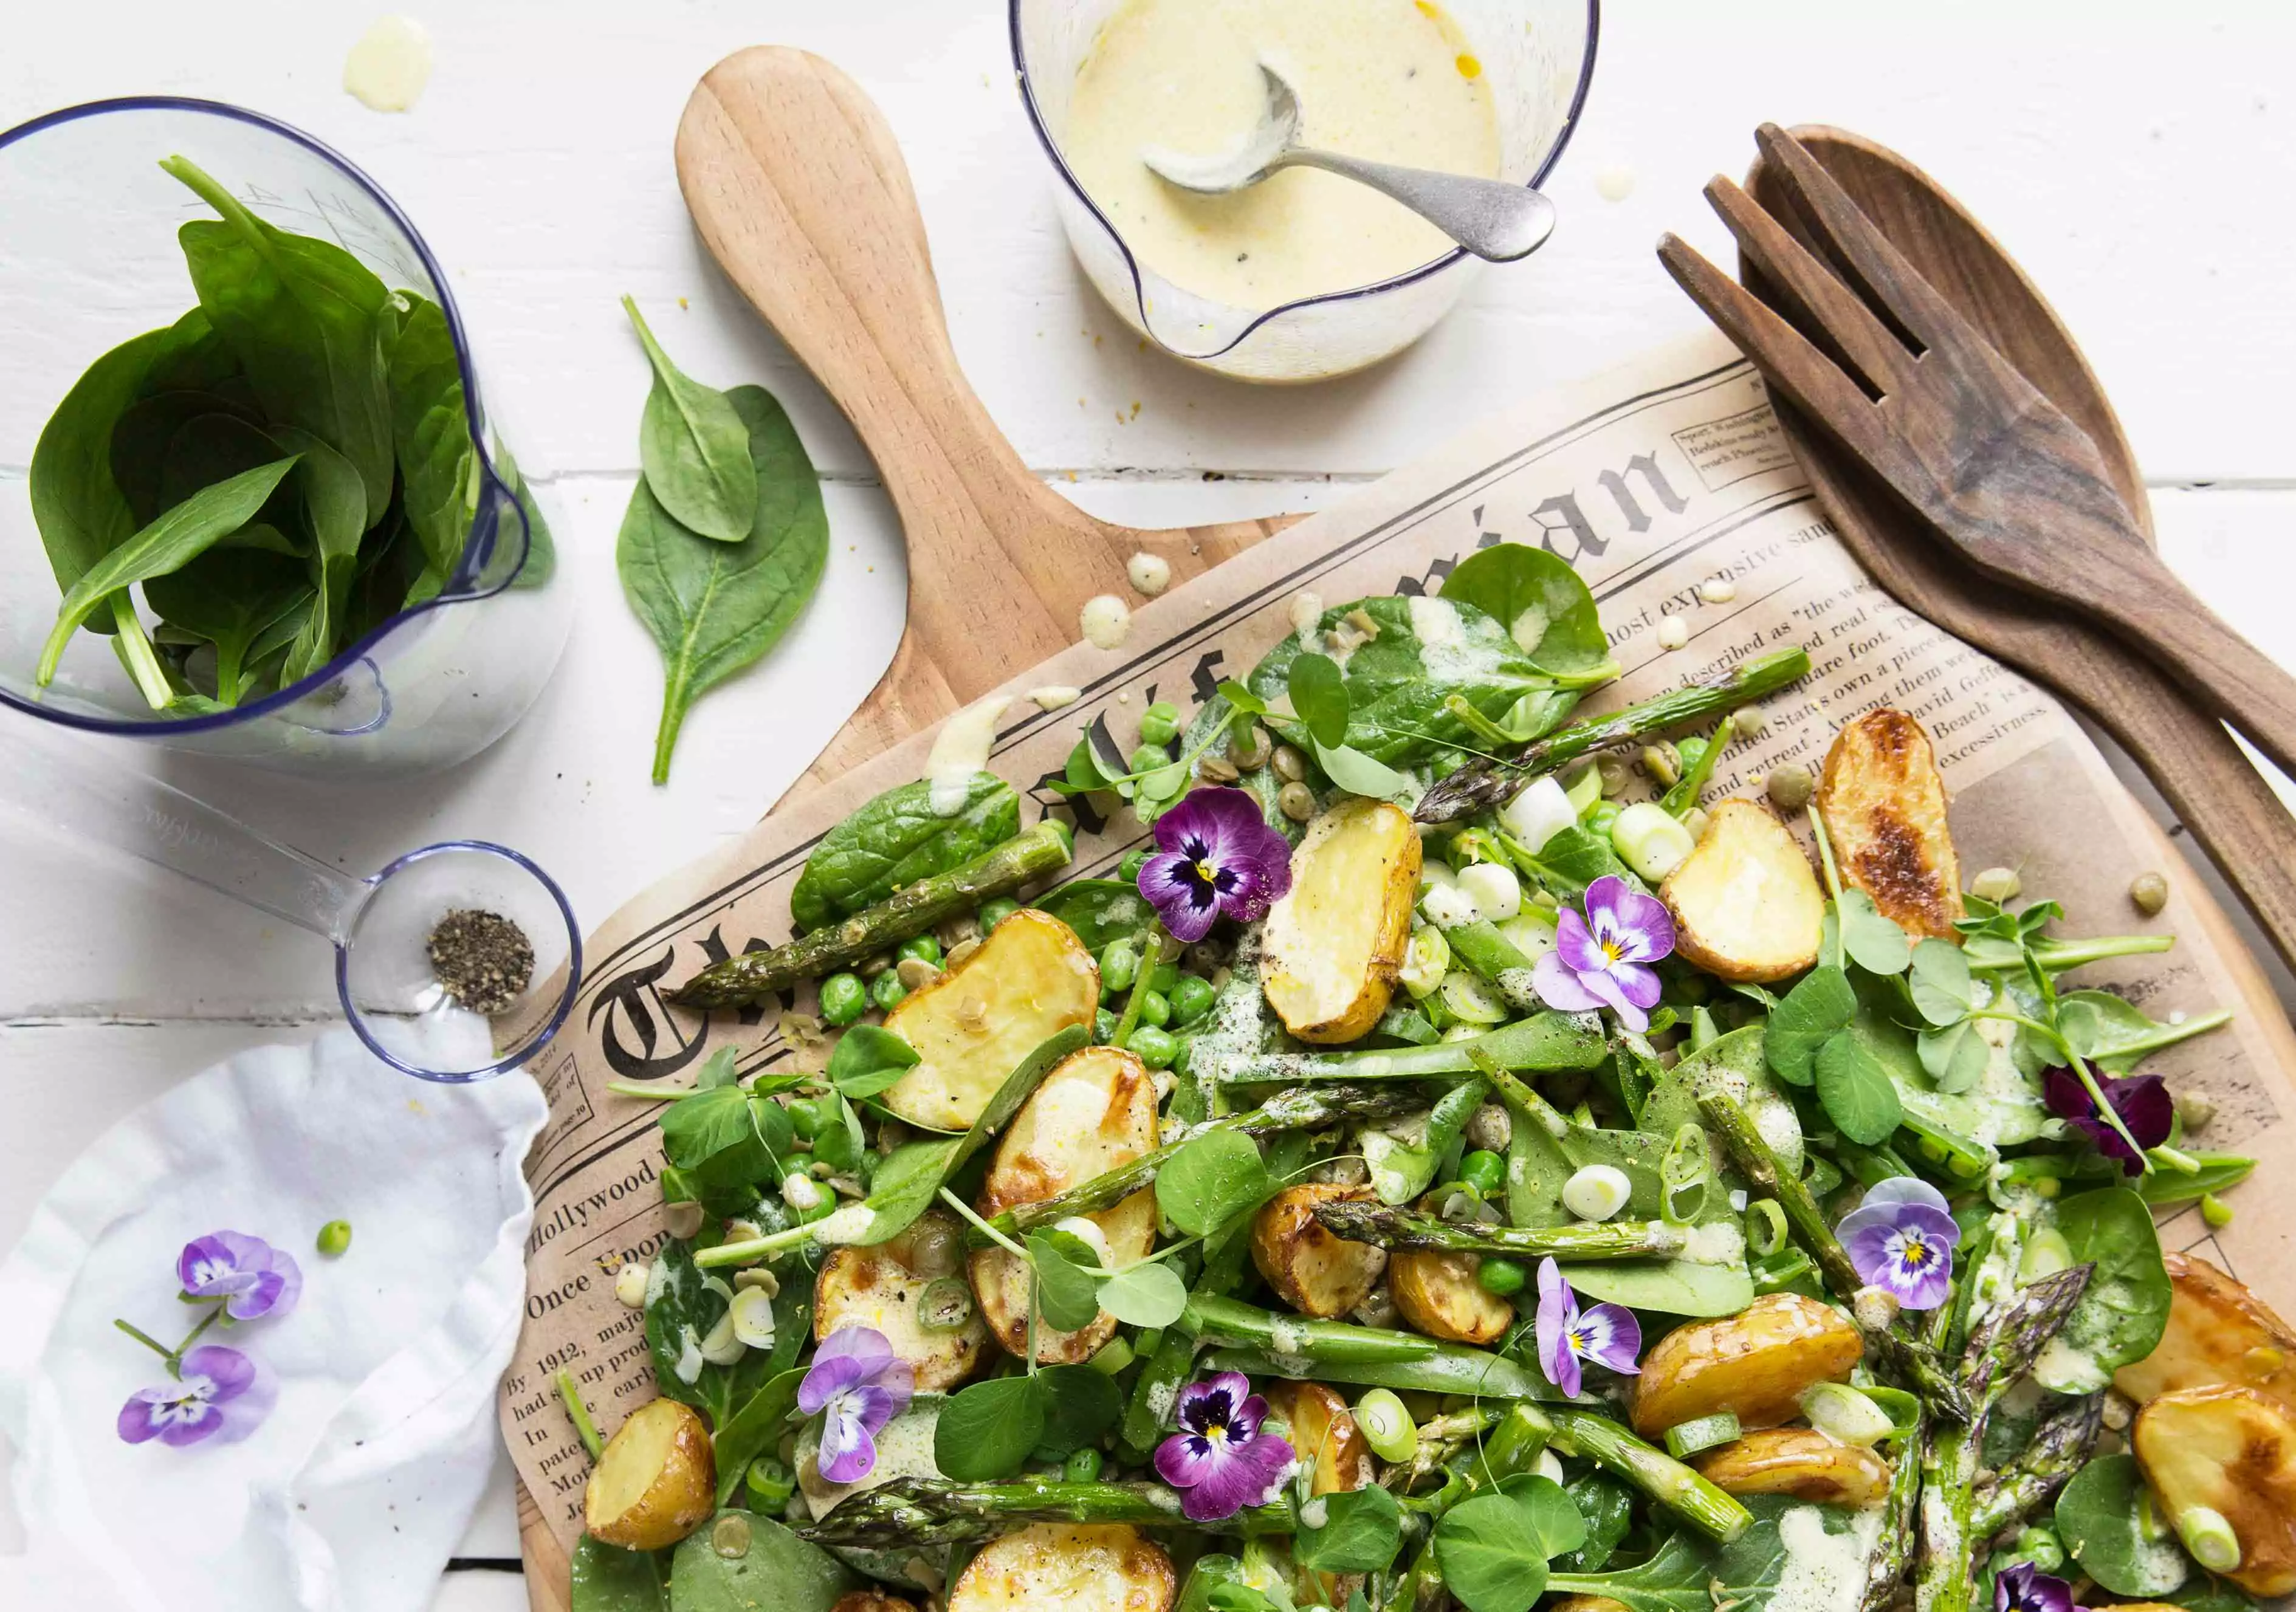 Summer salad with roasted potatoes and dijon dressing